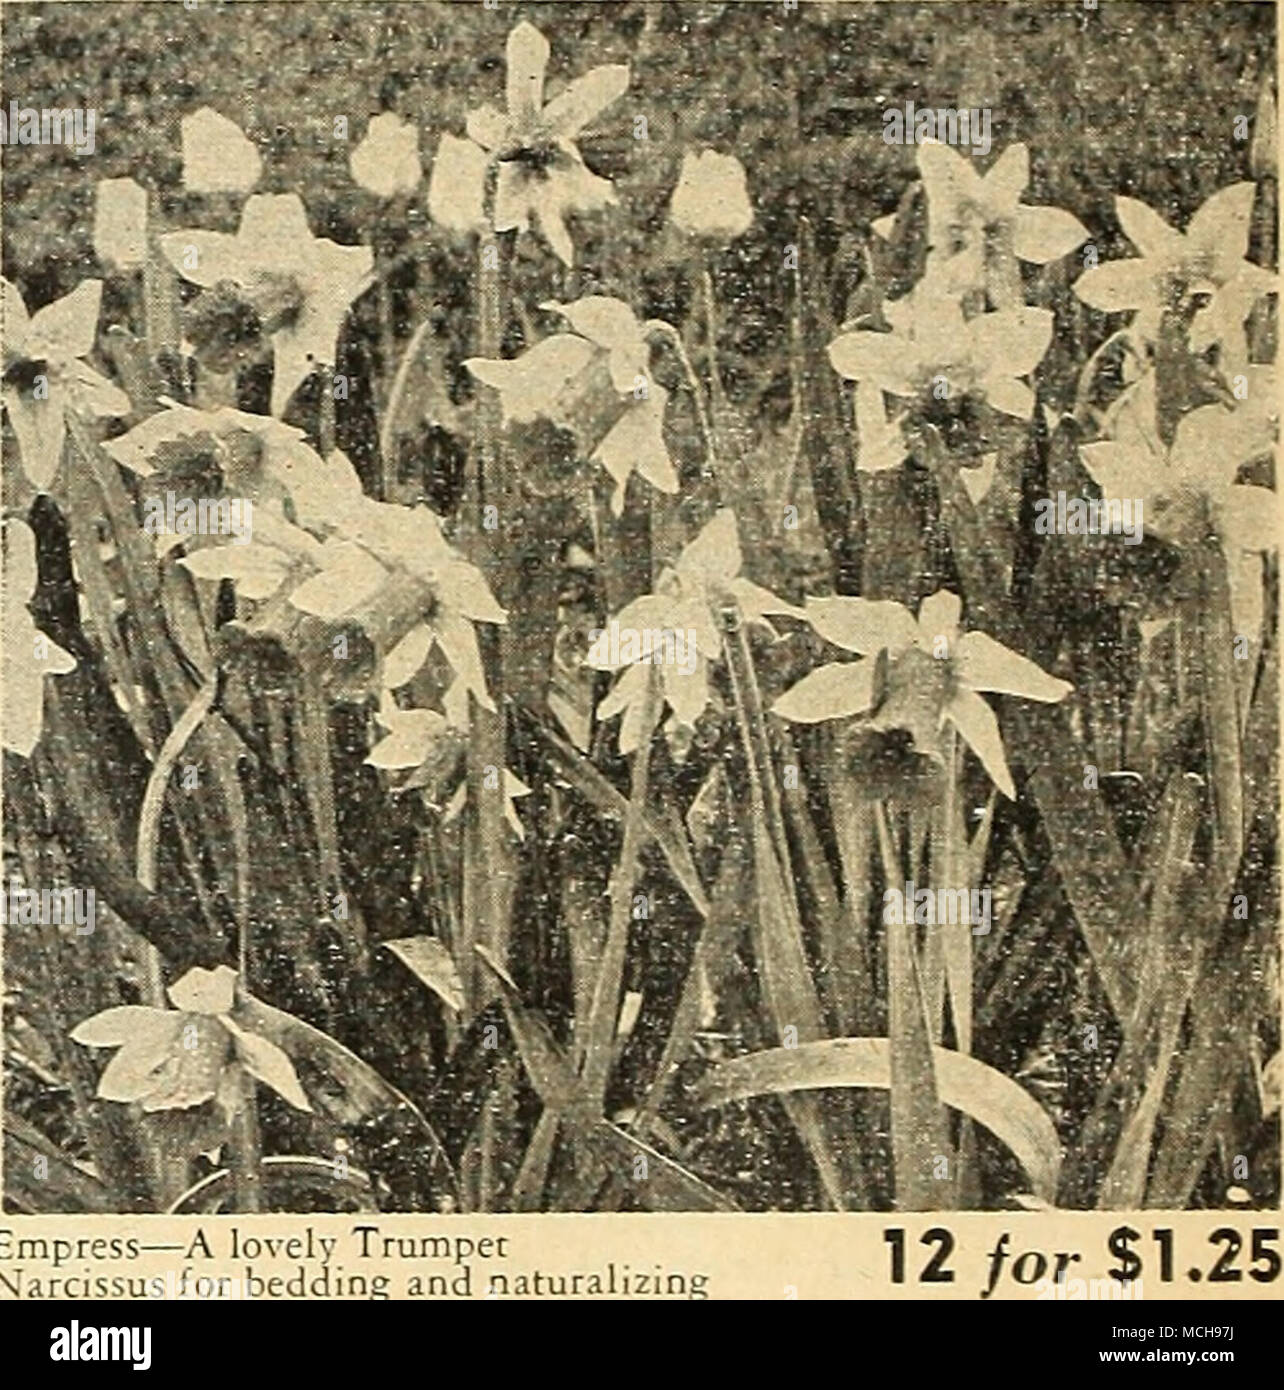 . EmpressâA lovely Trumpet Narcissus for bedding and naturalizing 40-683 Empress. A fitting companion to Emperor and of strong, robust growth. The fine large perianth is snow white contrasting well with the rich yellow trumpet which is attractivelv serrated and flanged at the edges. Rmmd Bidbs: 3 for 36c; 12 for S1.25; 25 for $2.25; 100 for $8.00. 40-684 Double-Nosed Bidbs: 3 for 60c; 12 for S2.00; 25 for $3.75; 100 for S14.G0. eci lal 'k^' Collection of the Eight ISamed Varieties of Giant Trumoet DAFFODILS offered on these two pages 42-050 24 Bulbs 3 each, value $ 3.83 for $ 3.25 42-05? 48 Bu Stock Photo